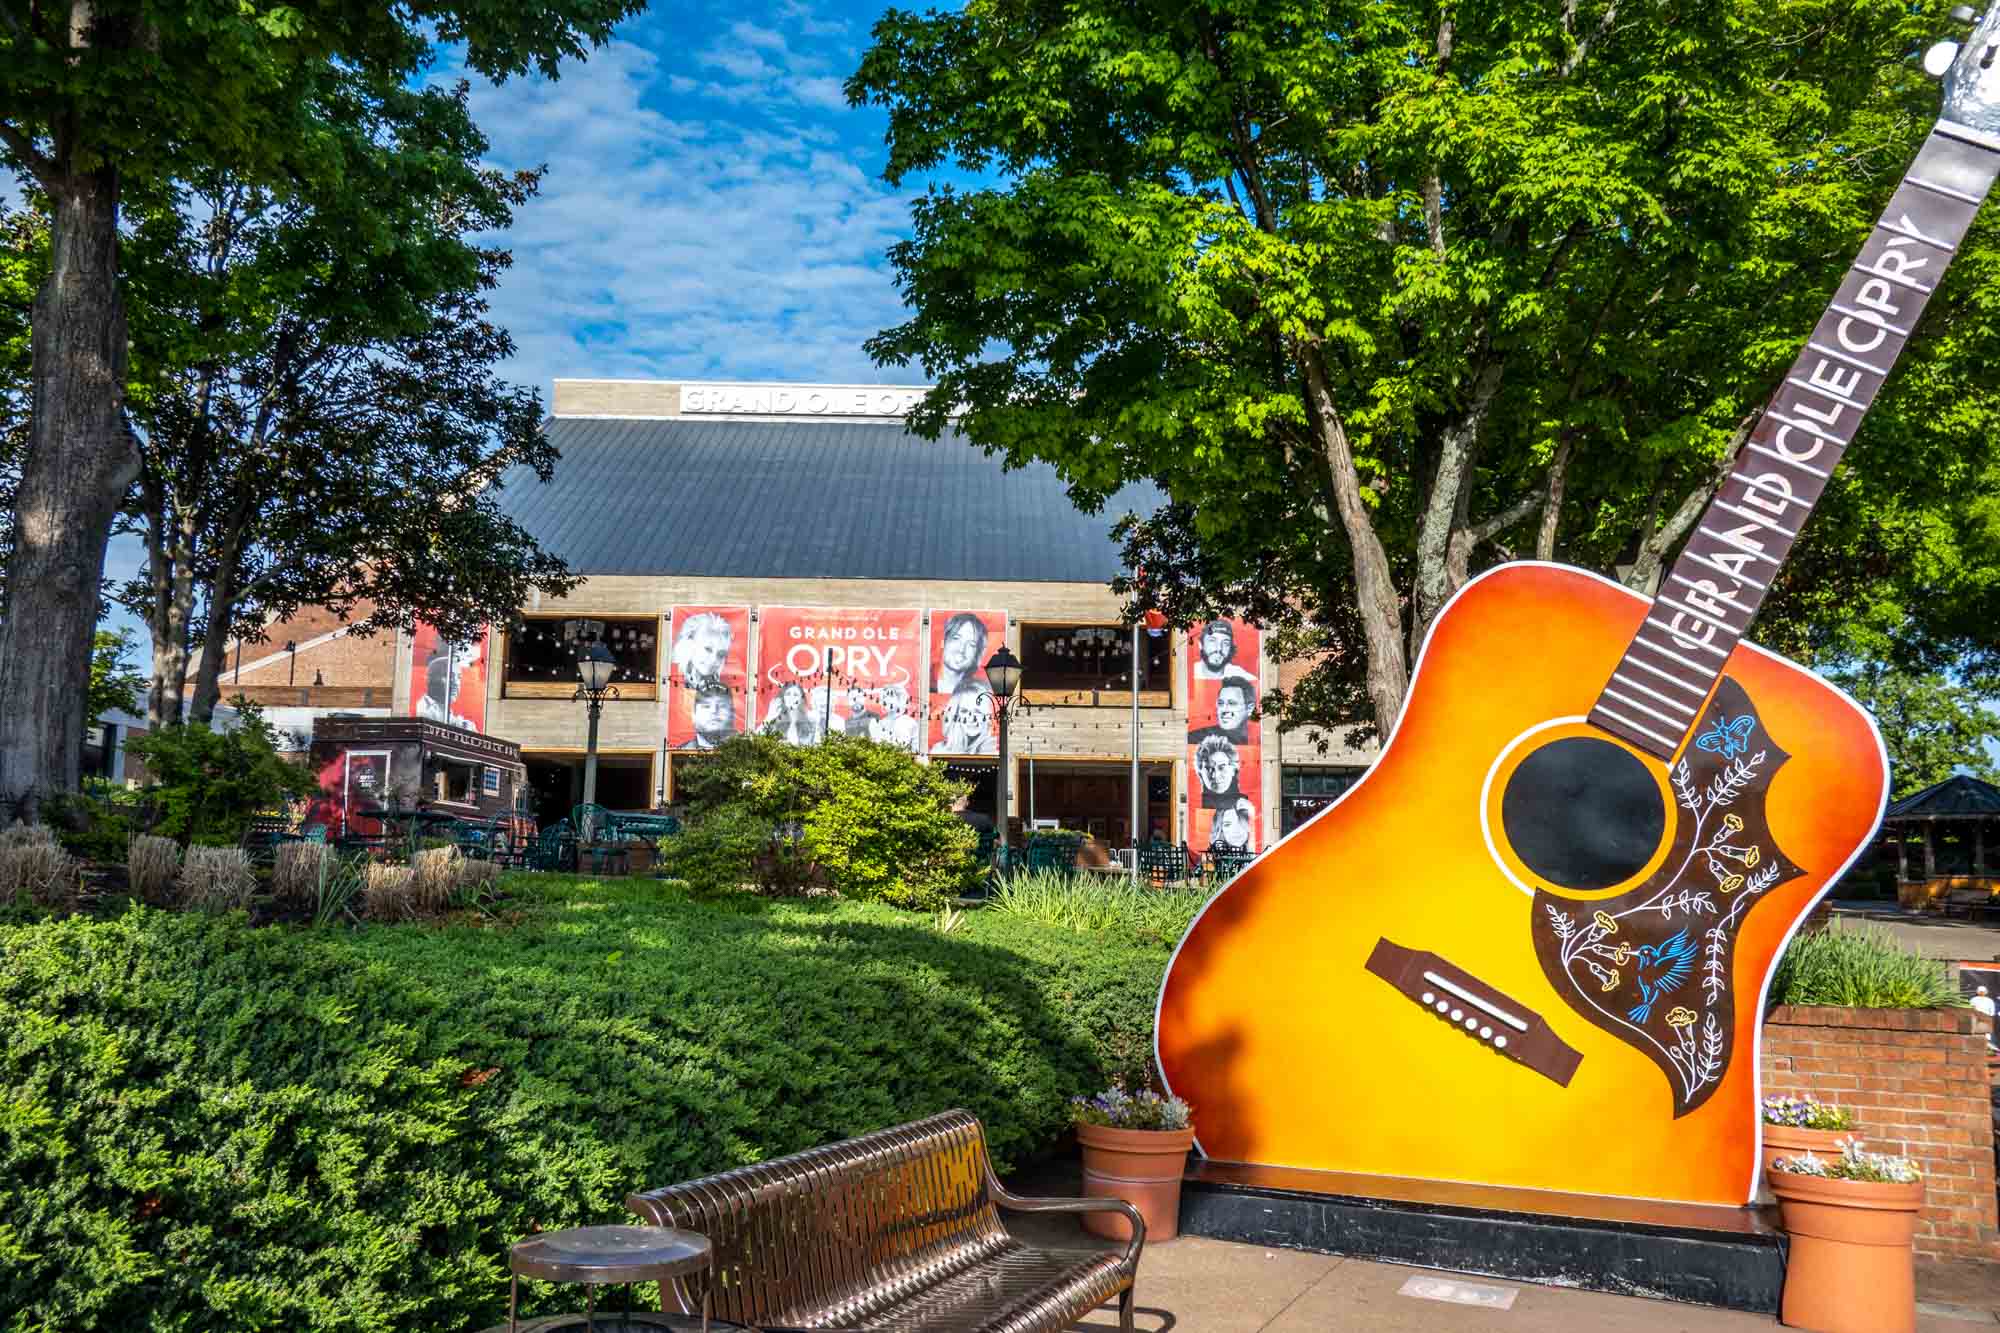 Large guitar sculpture in front of a large brick building with a sign for the Grand Ole Opry